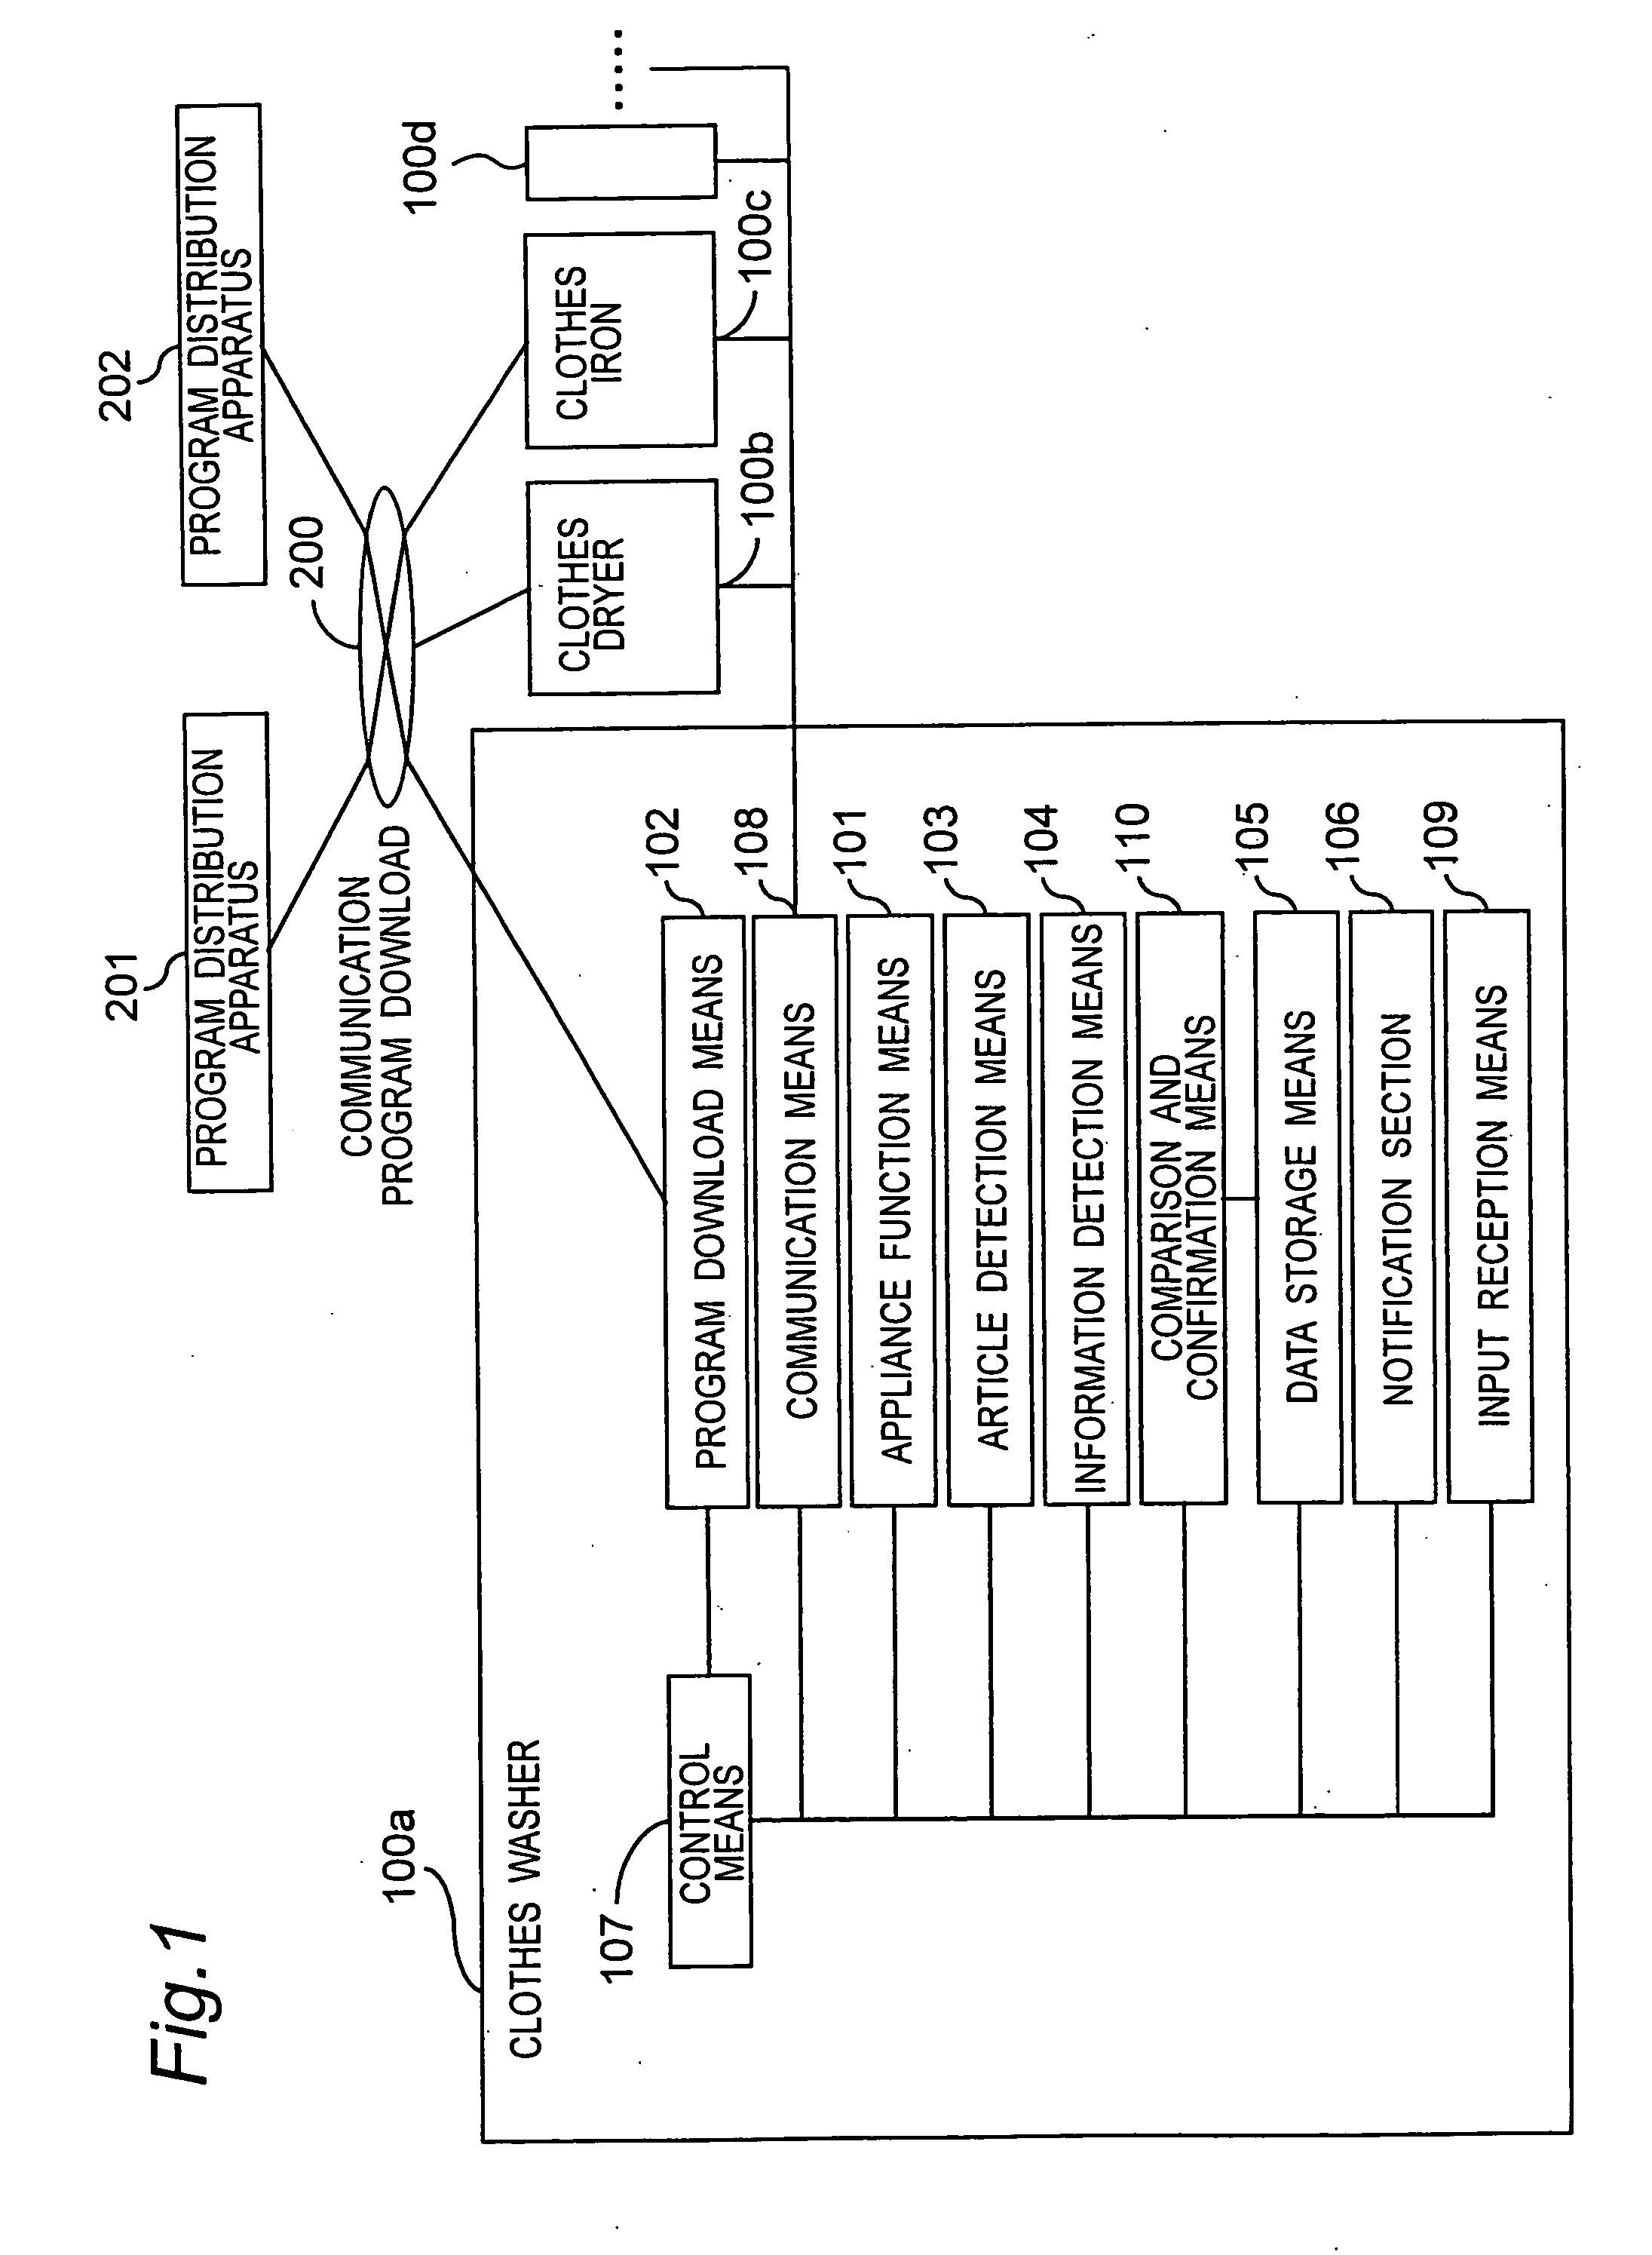 Home information appliance system